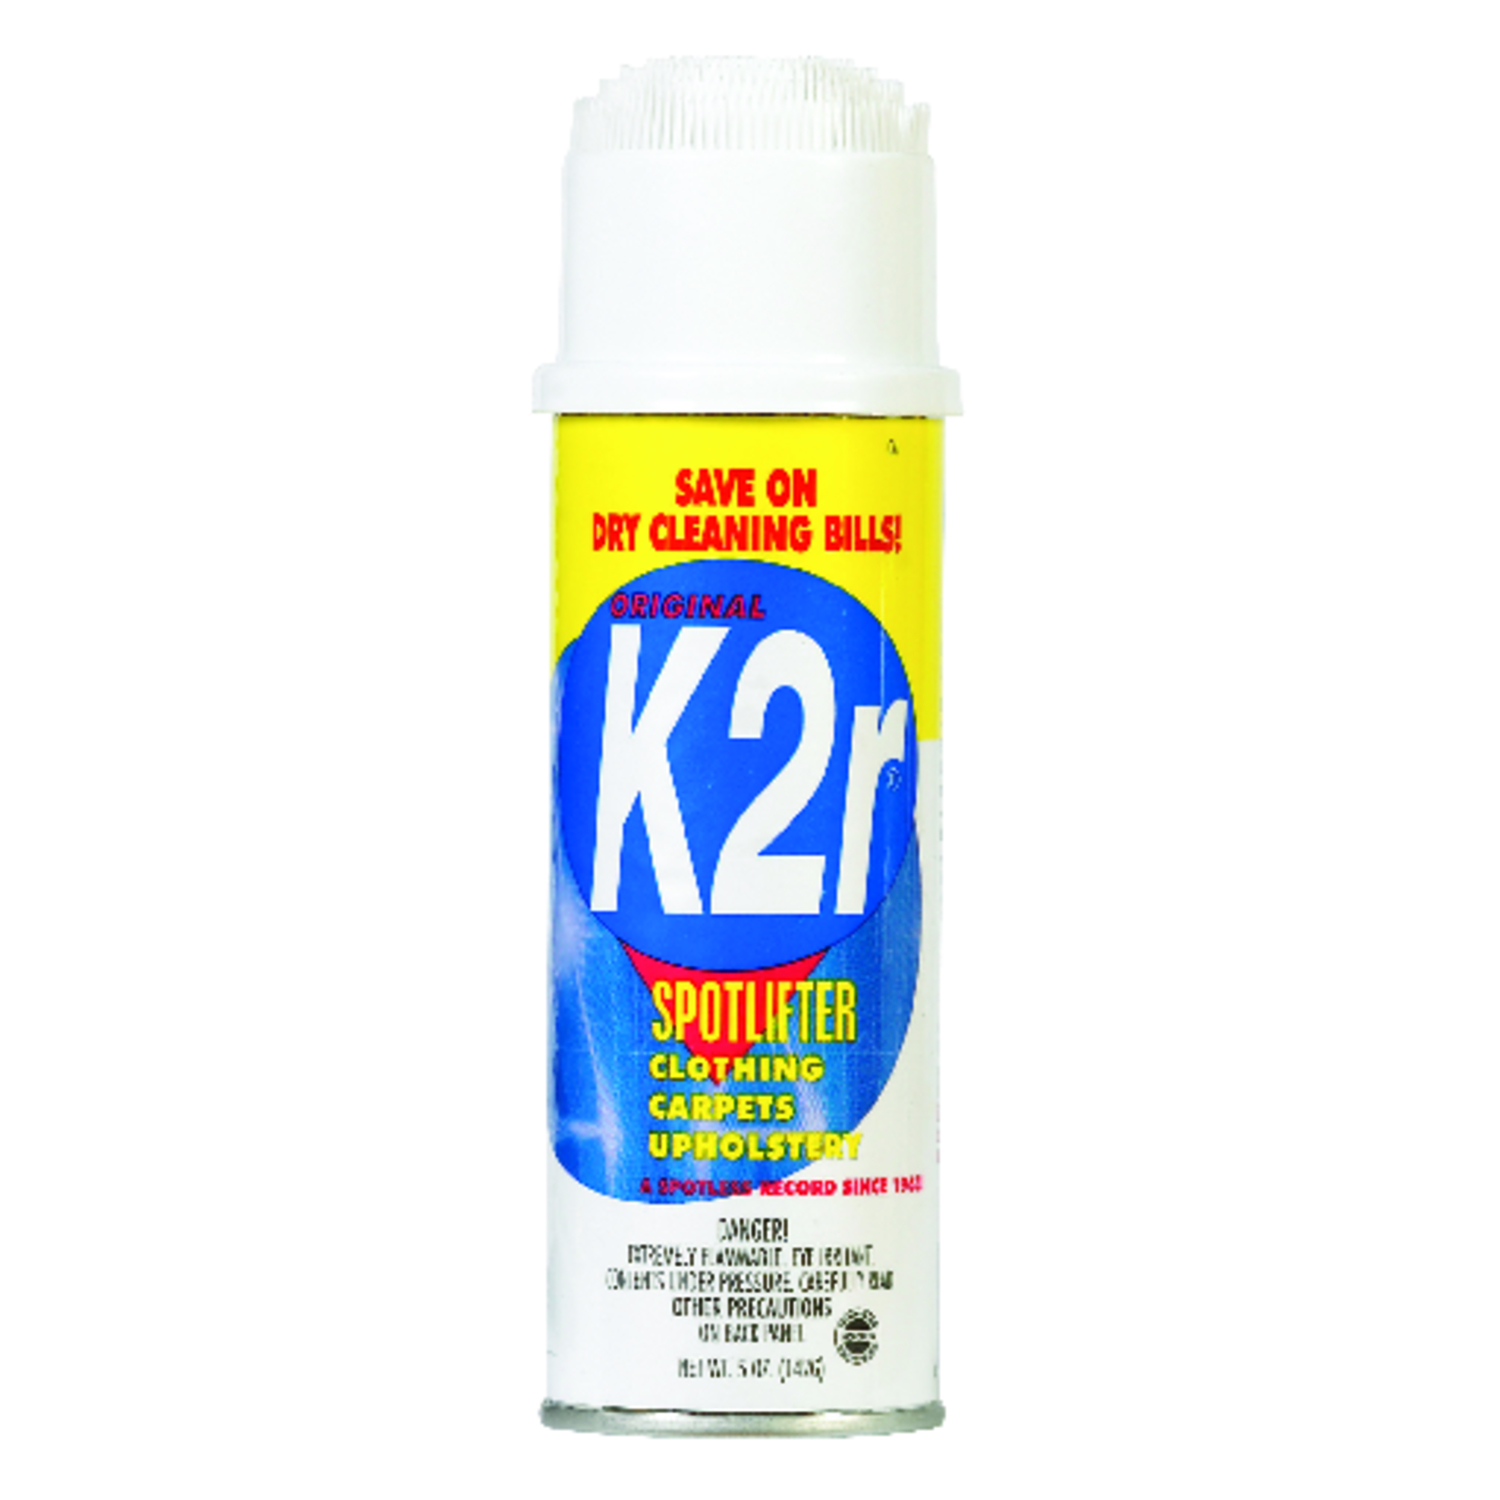 K2R Spot Lifter No Scent Stain Remover 5 oz Spray